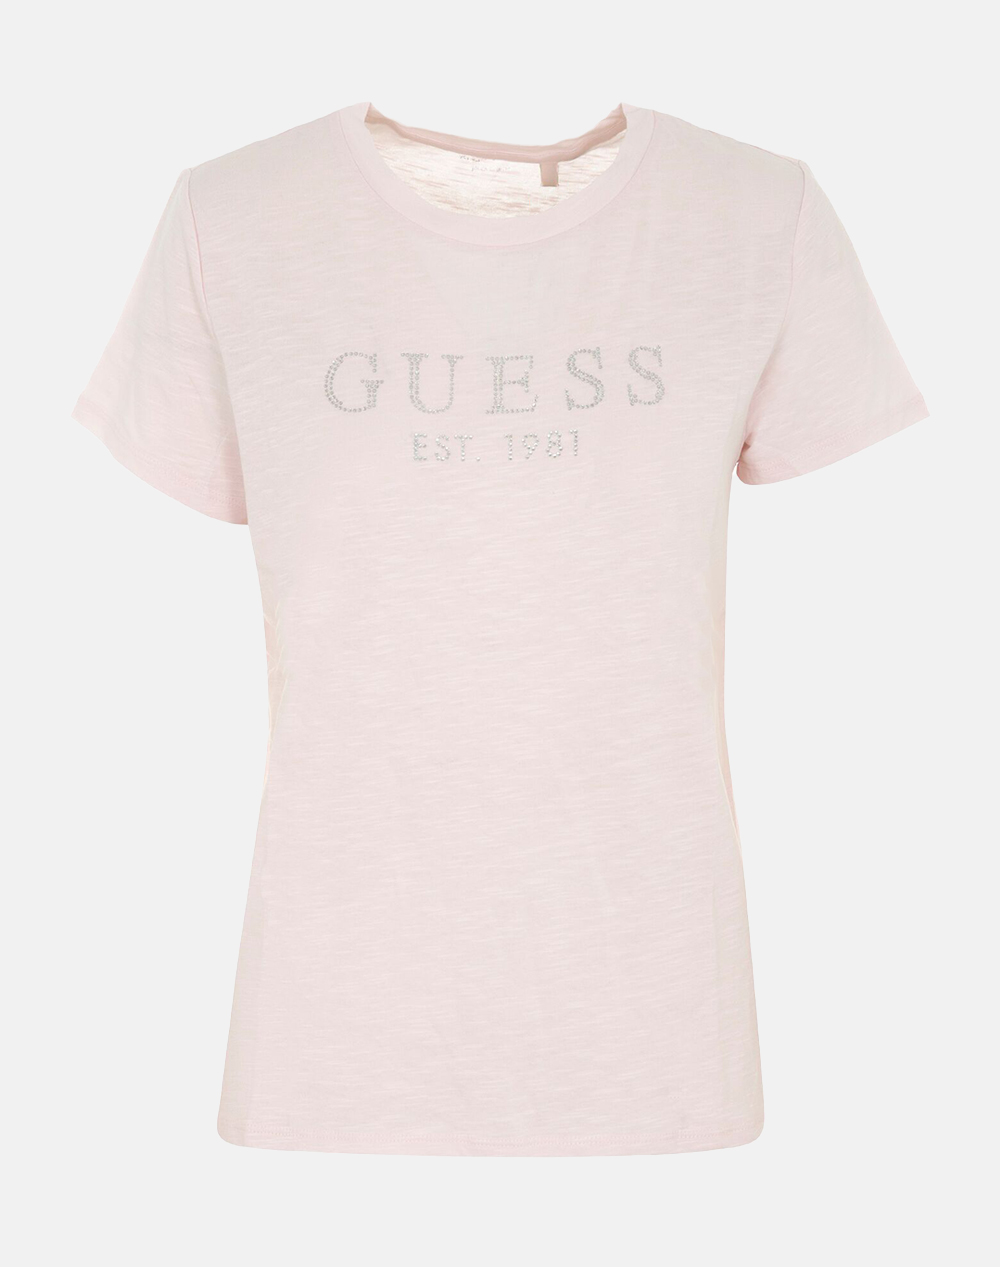 GUESS SS GUESS 1981 CRYSTAL EASY TEE ΜΠΛΟΥΖΑ ΓΥΝΑΙΚΕΙΟ W3GI76K8G01-A60W LightPink 0410AGUES3400310_XR20891